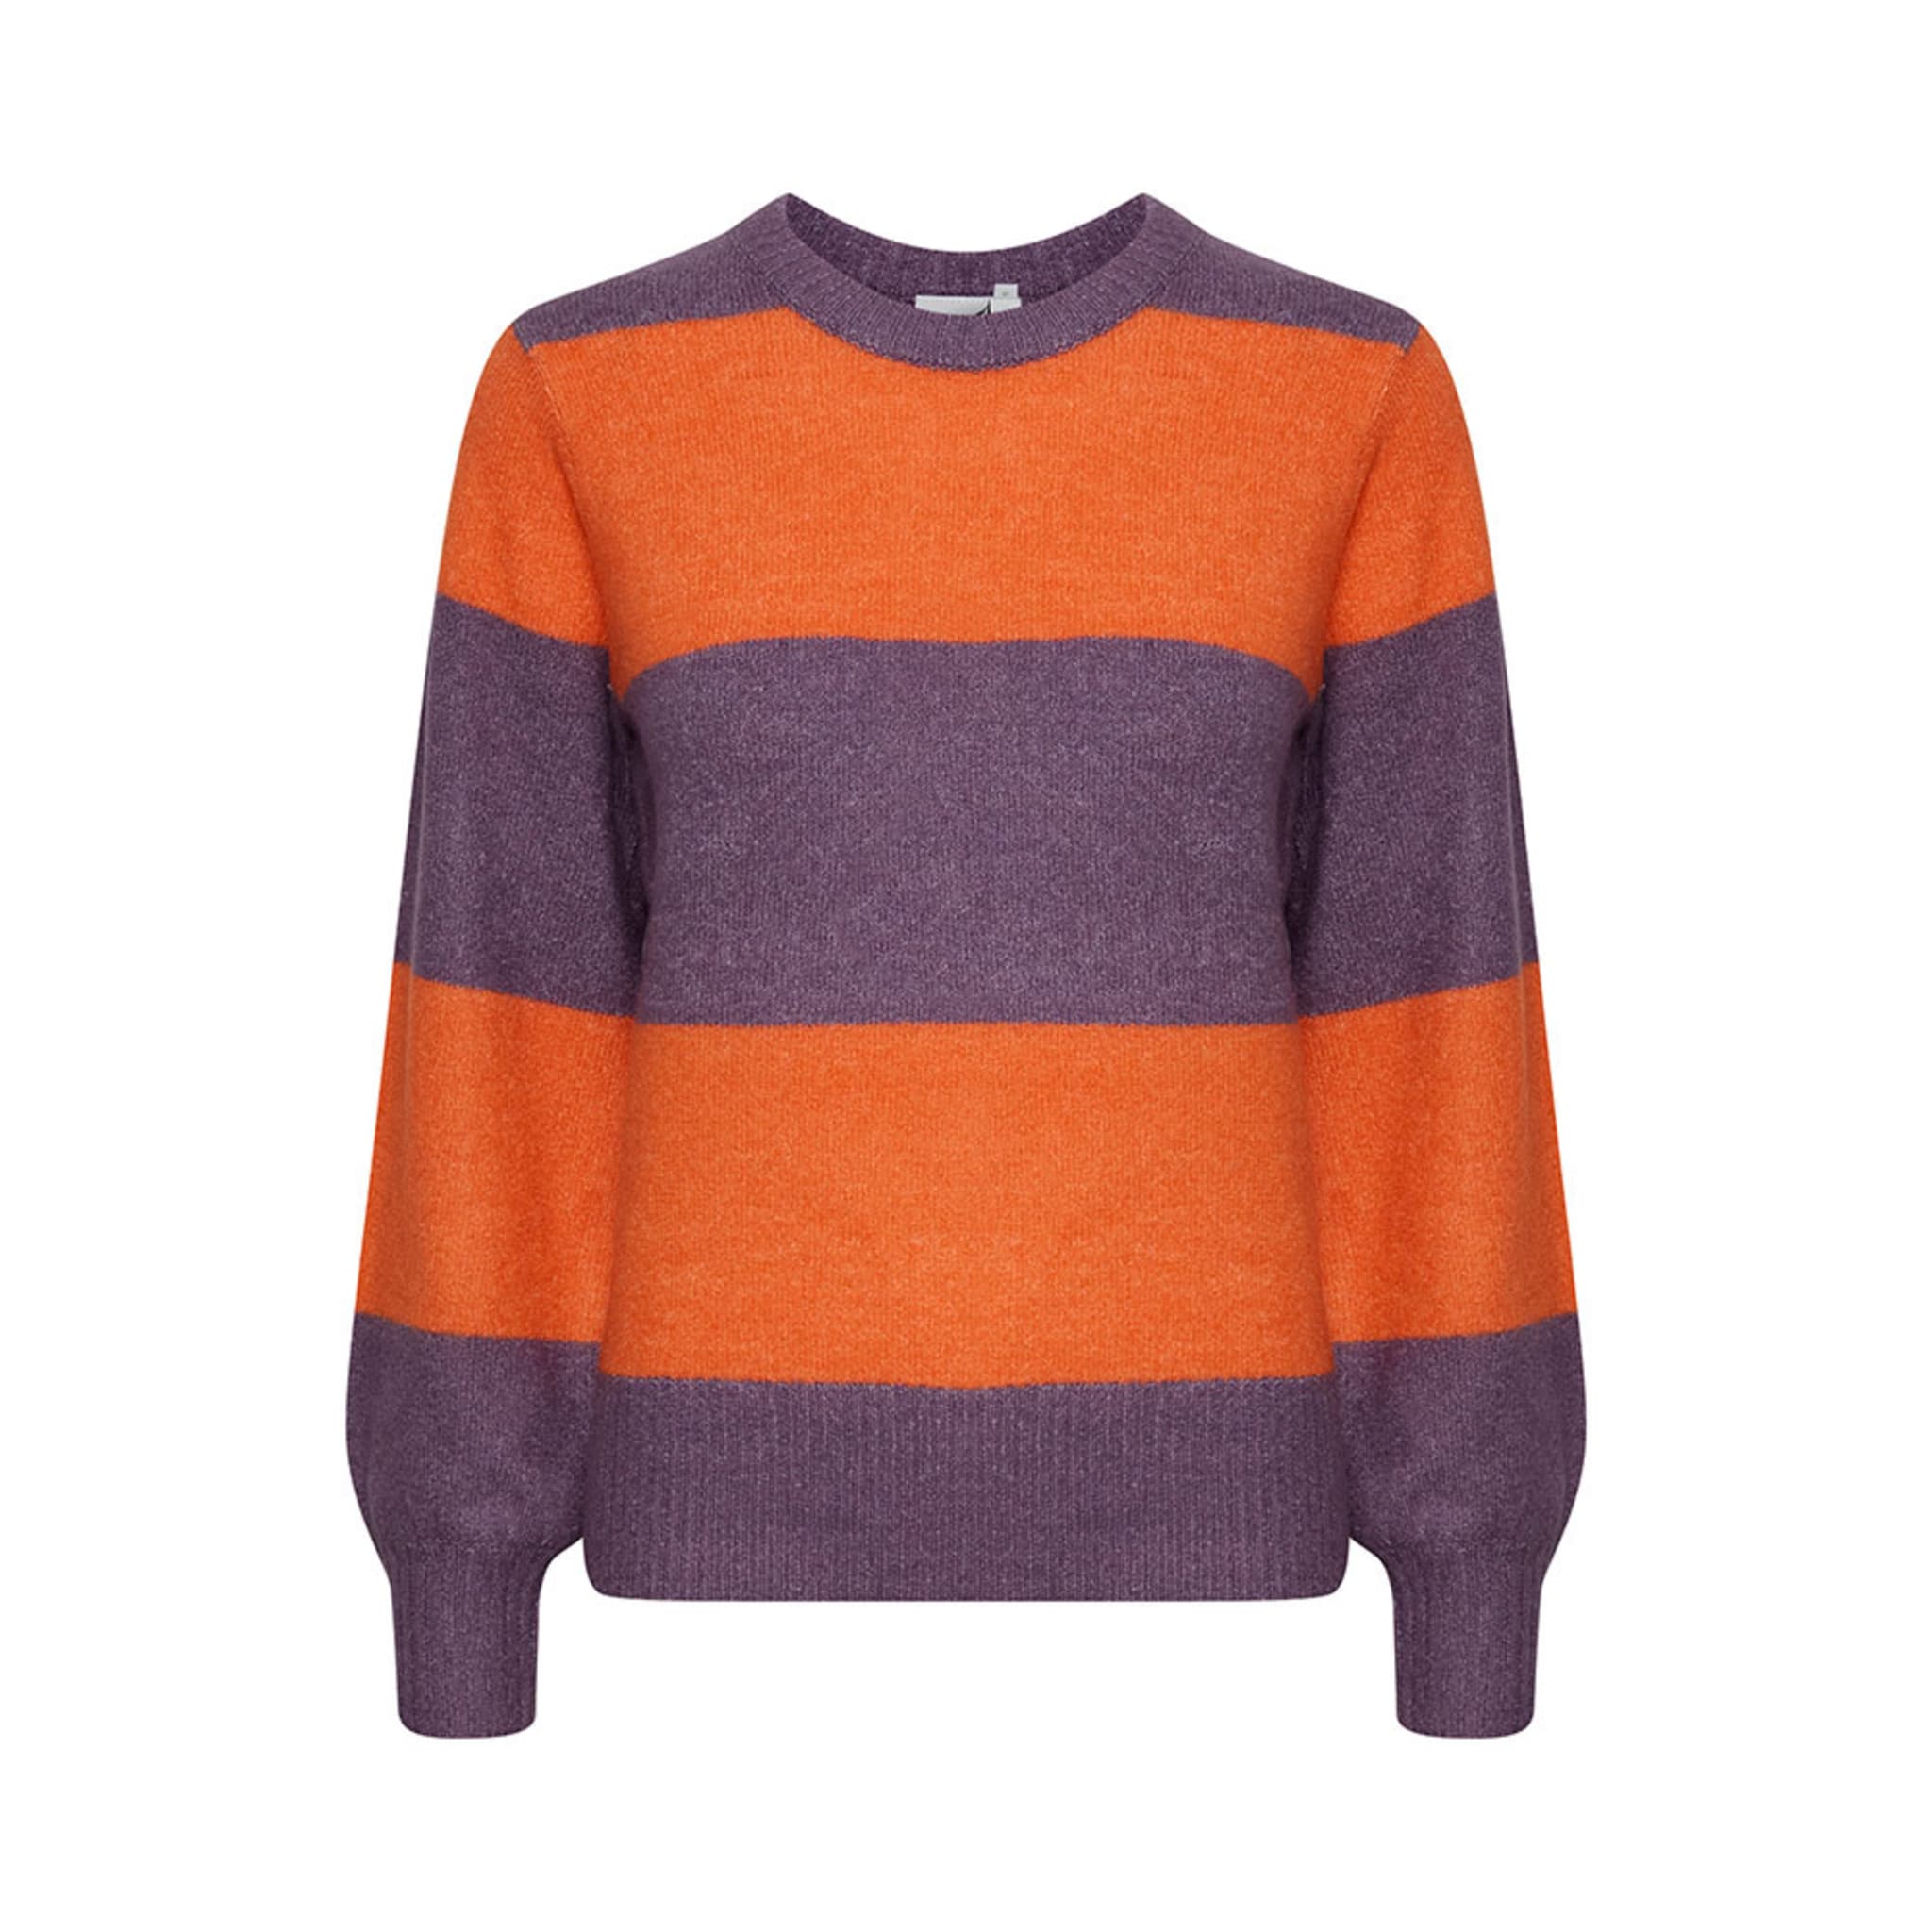 IHEDEN Sweater, Loganberry